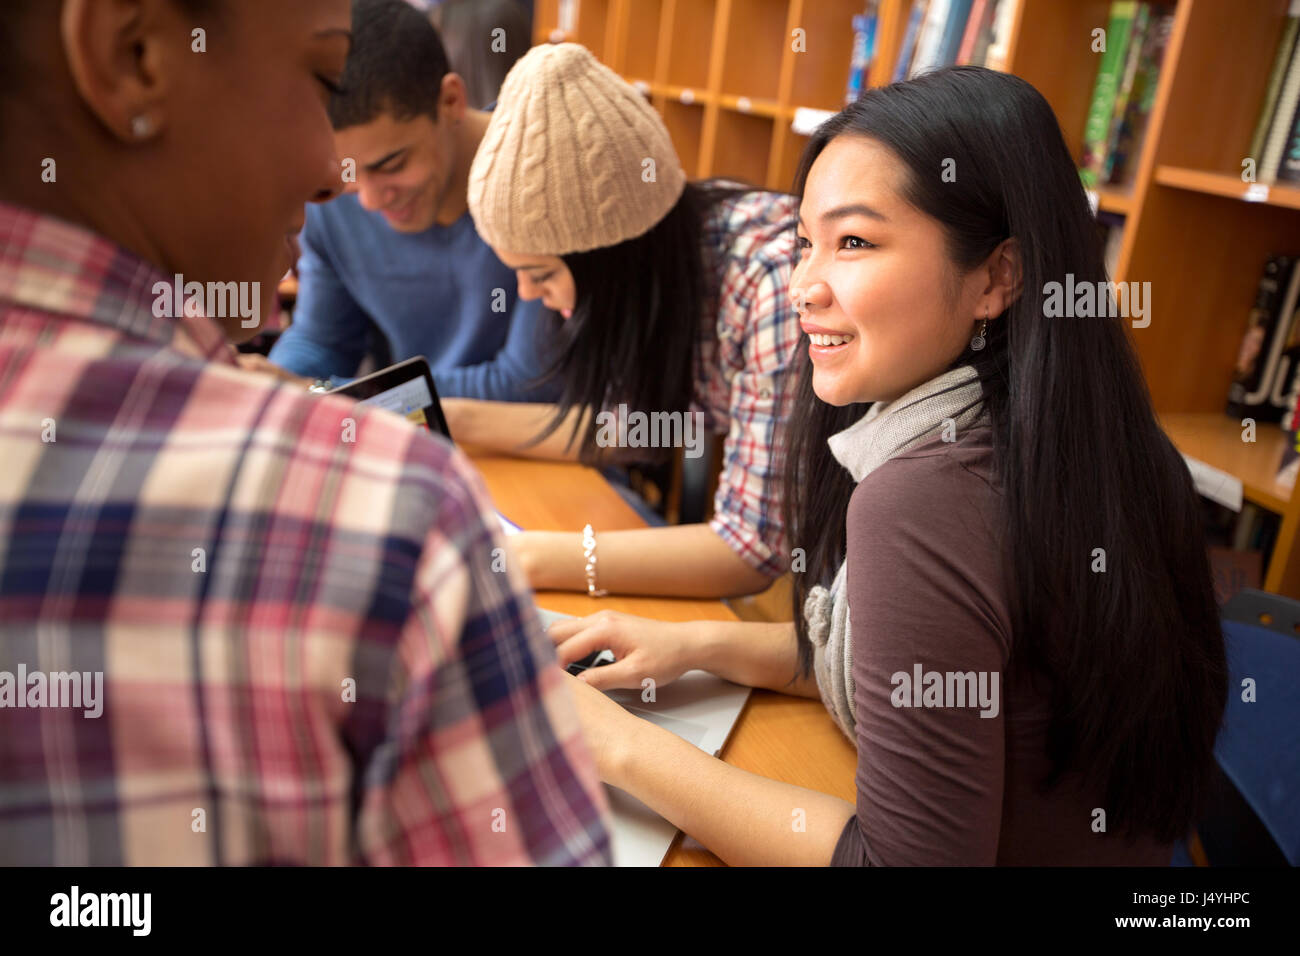 Studding friends socializing and studying together in library Stock Photo